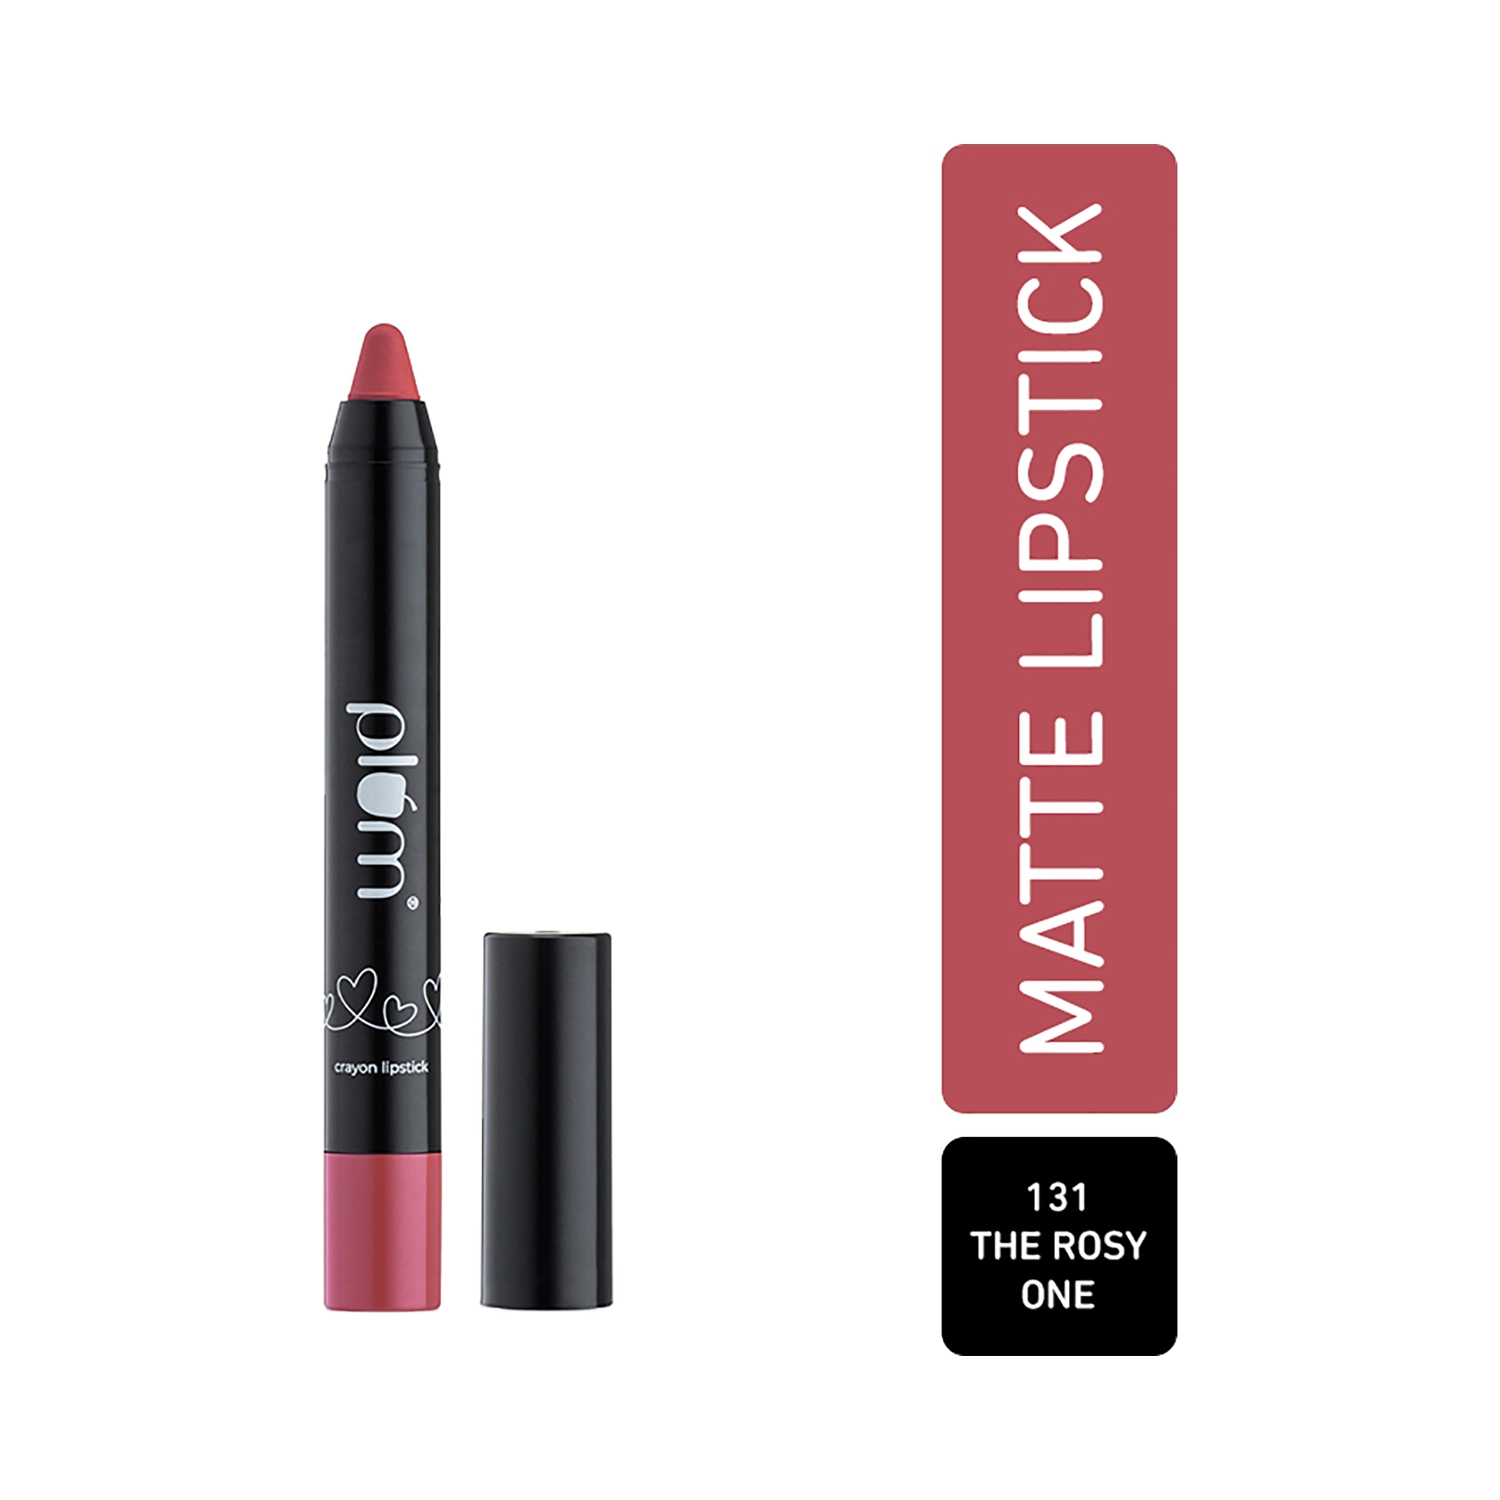 Plum | Plum Twist & Go Matte Crayon Lipstick with Ceramides & Hyaluronic Acid - 131 The Rosy One (1.8g)